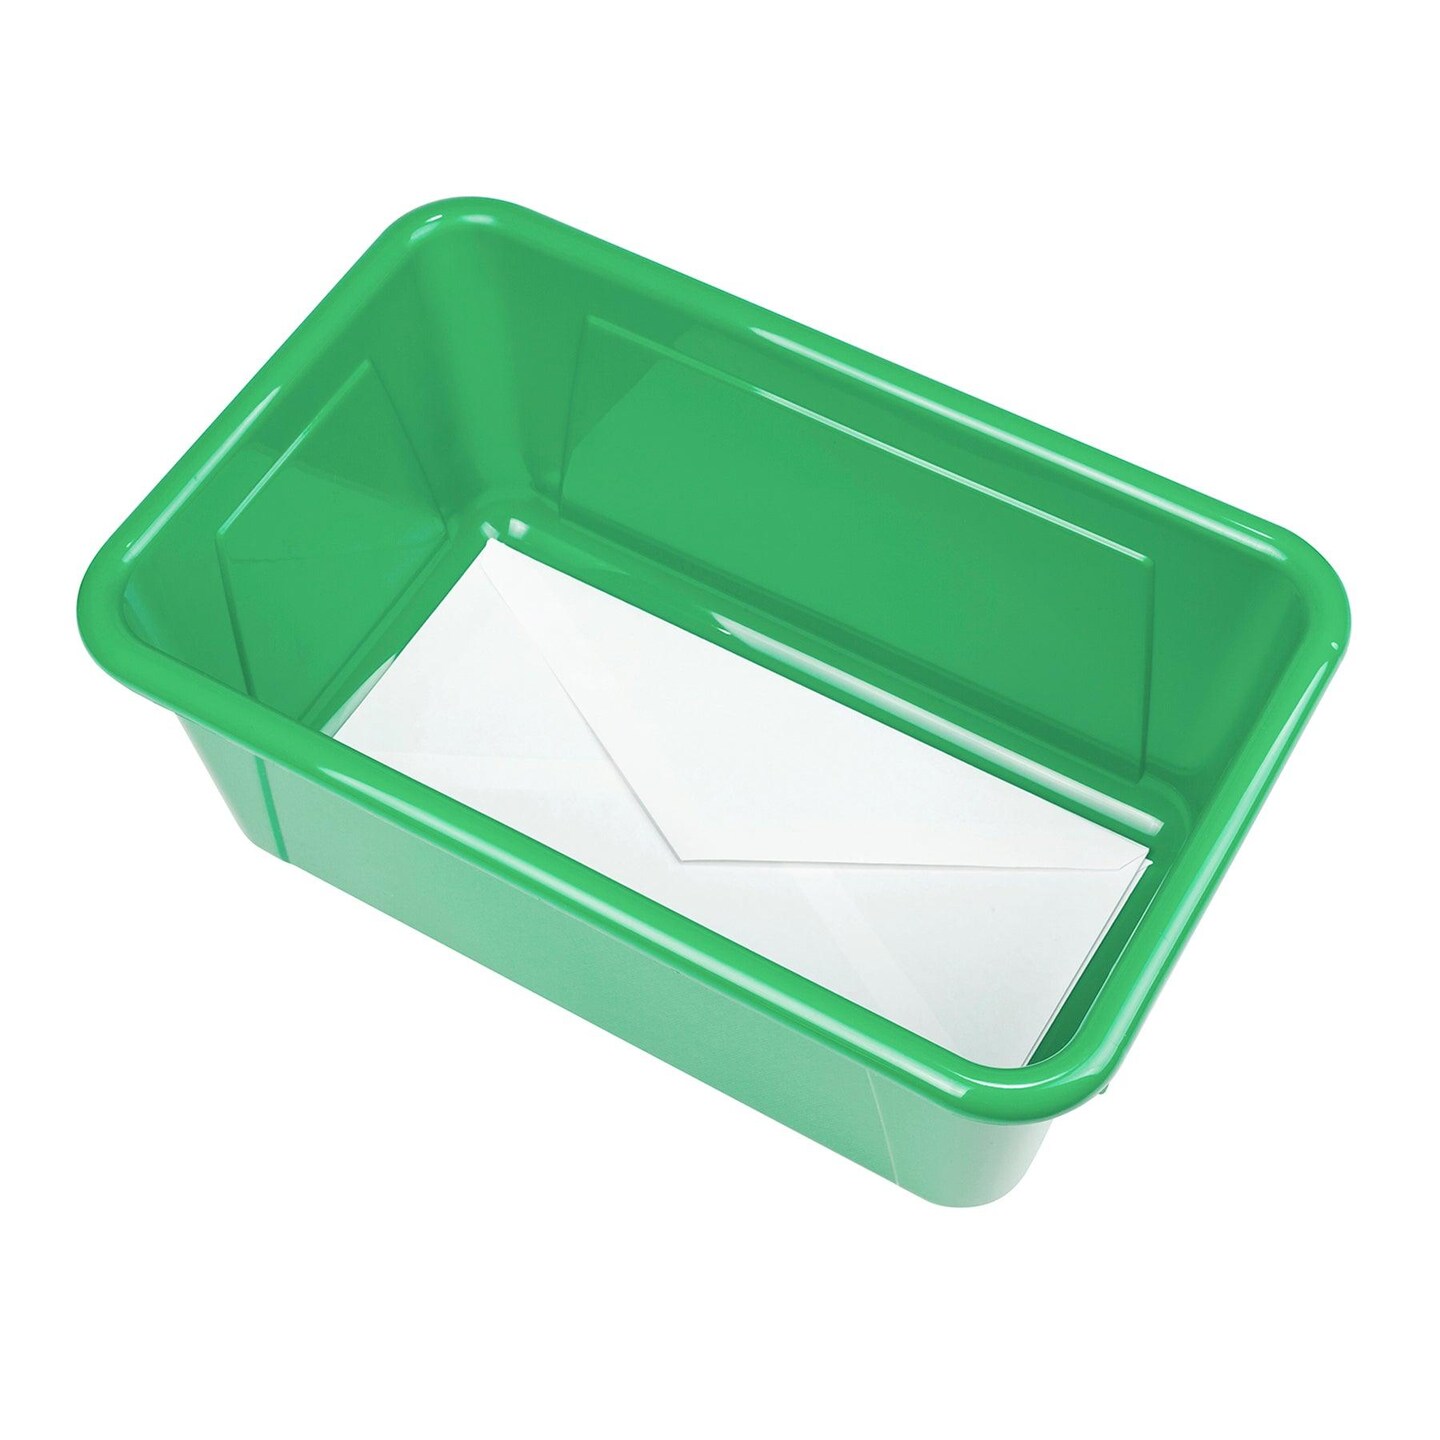 Small Cubby Bin, Green, Pack of 5